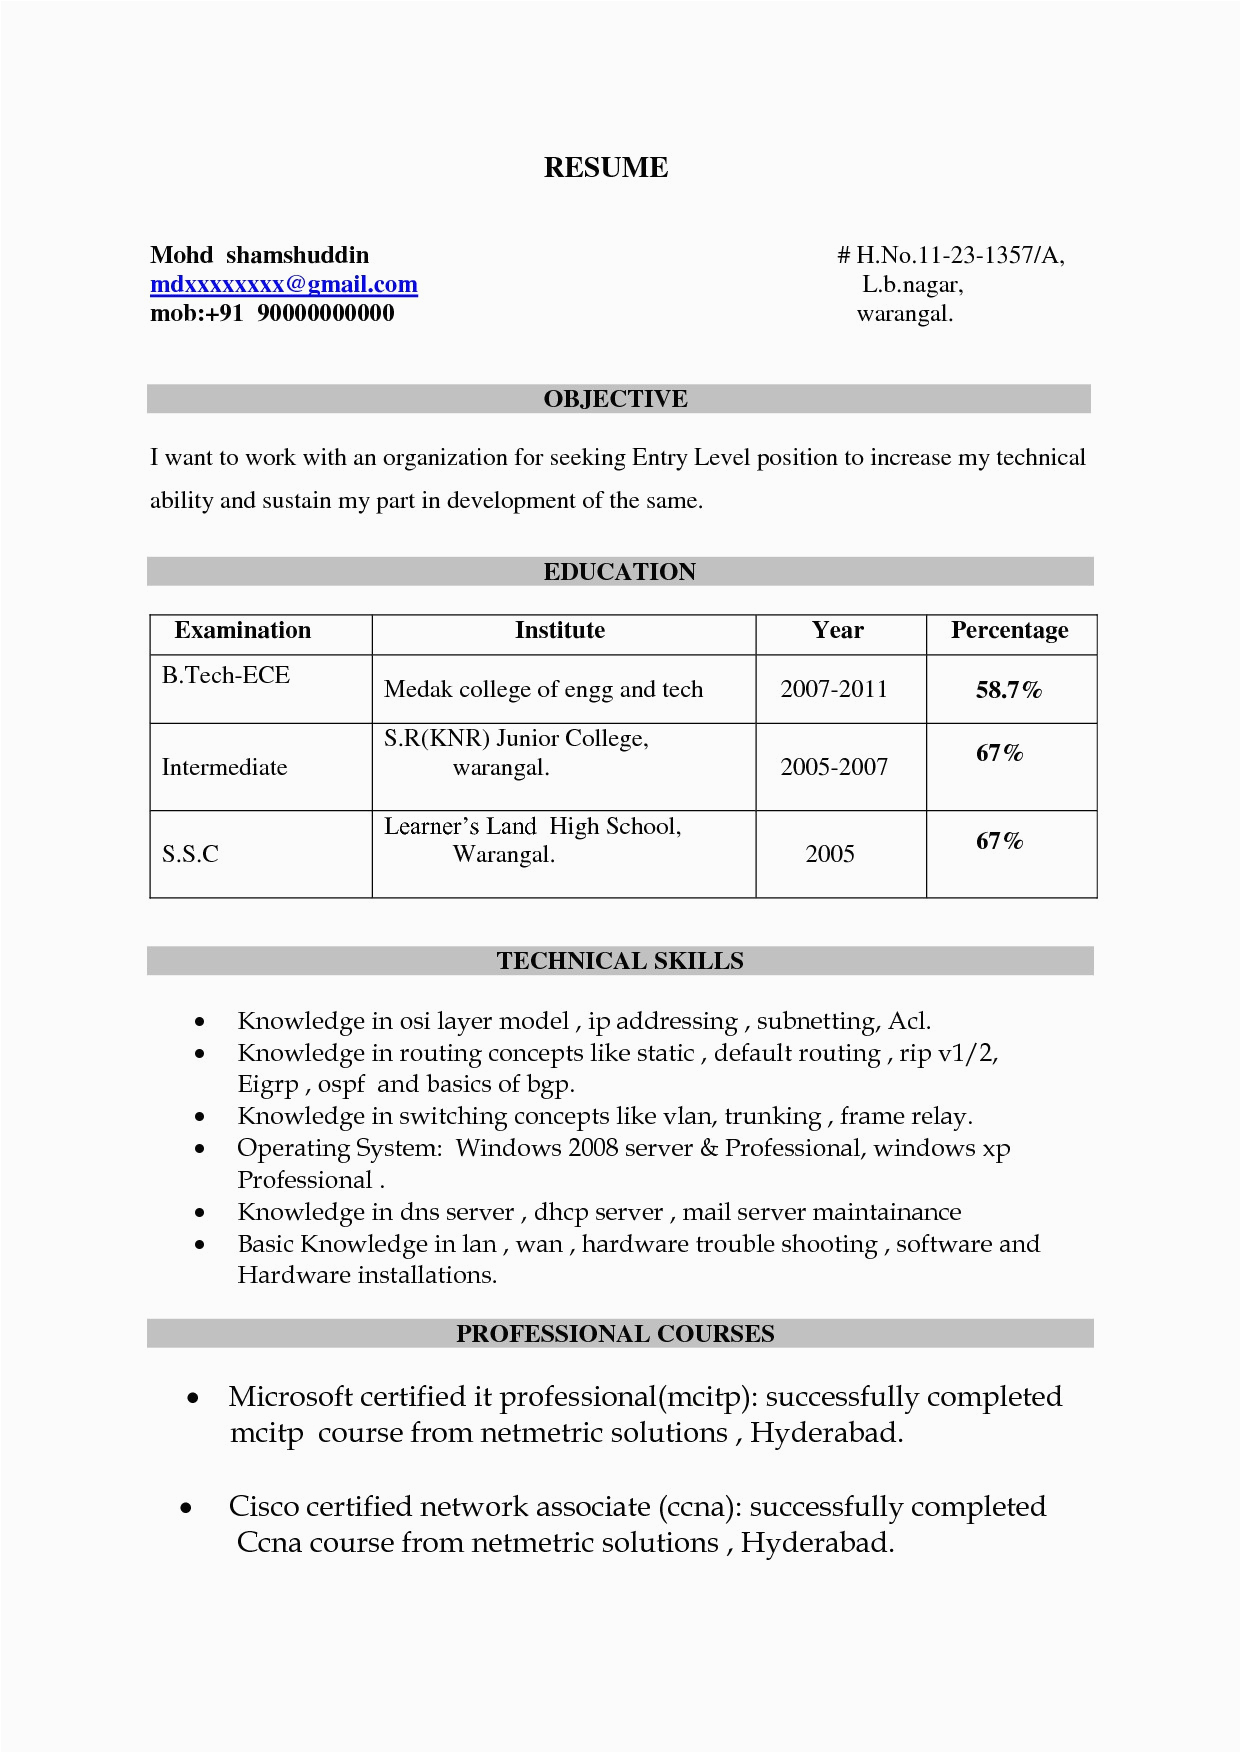 ccnp resume sample for freshers